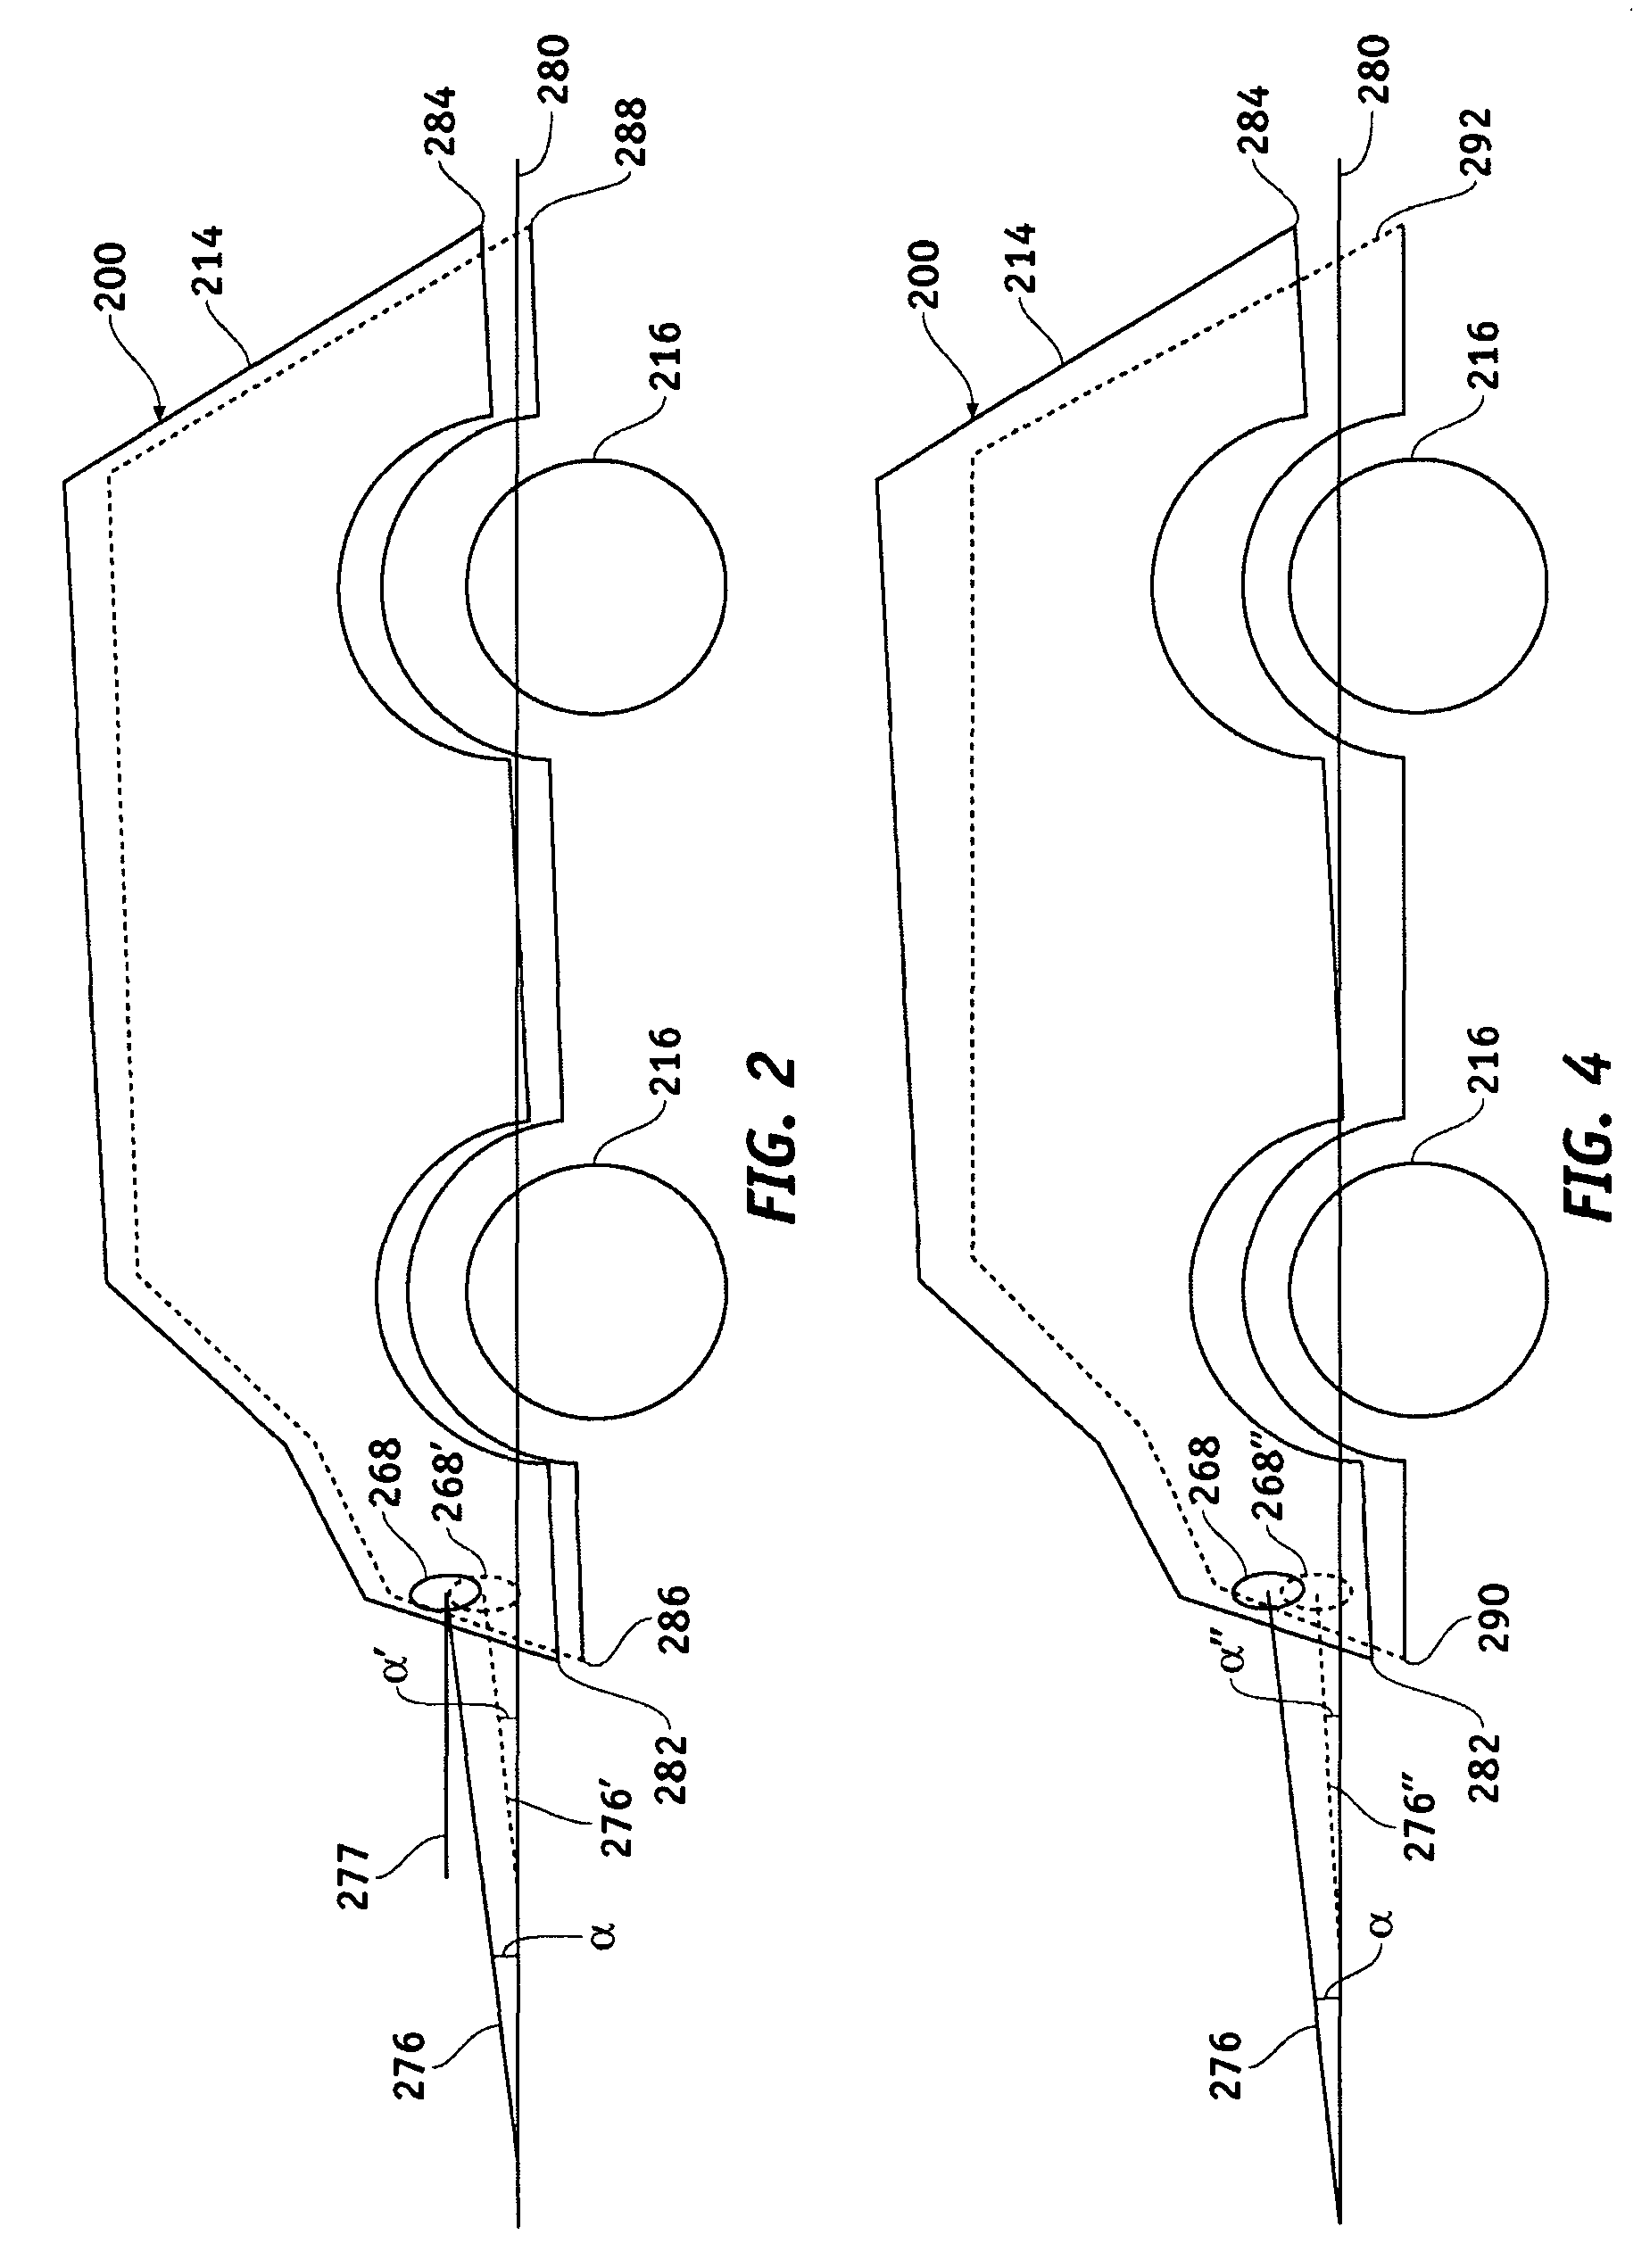 Automotive systems and methods of operating vehicles